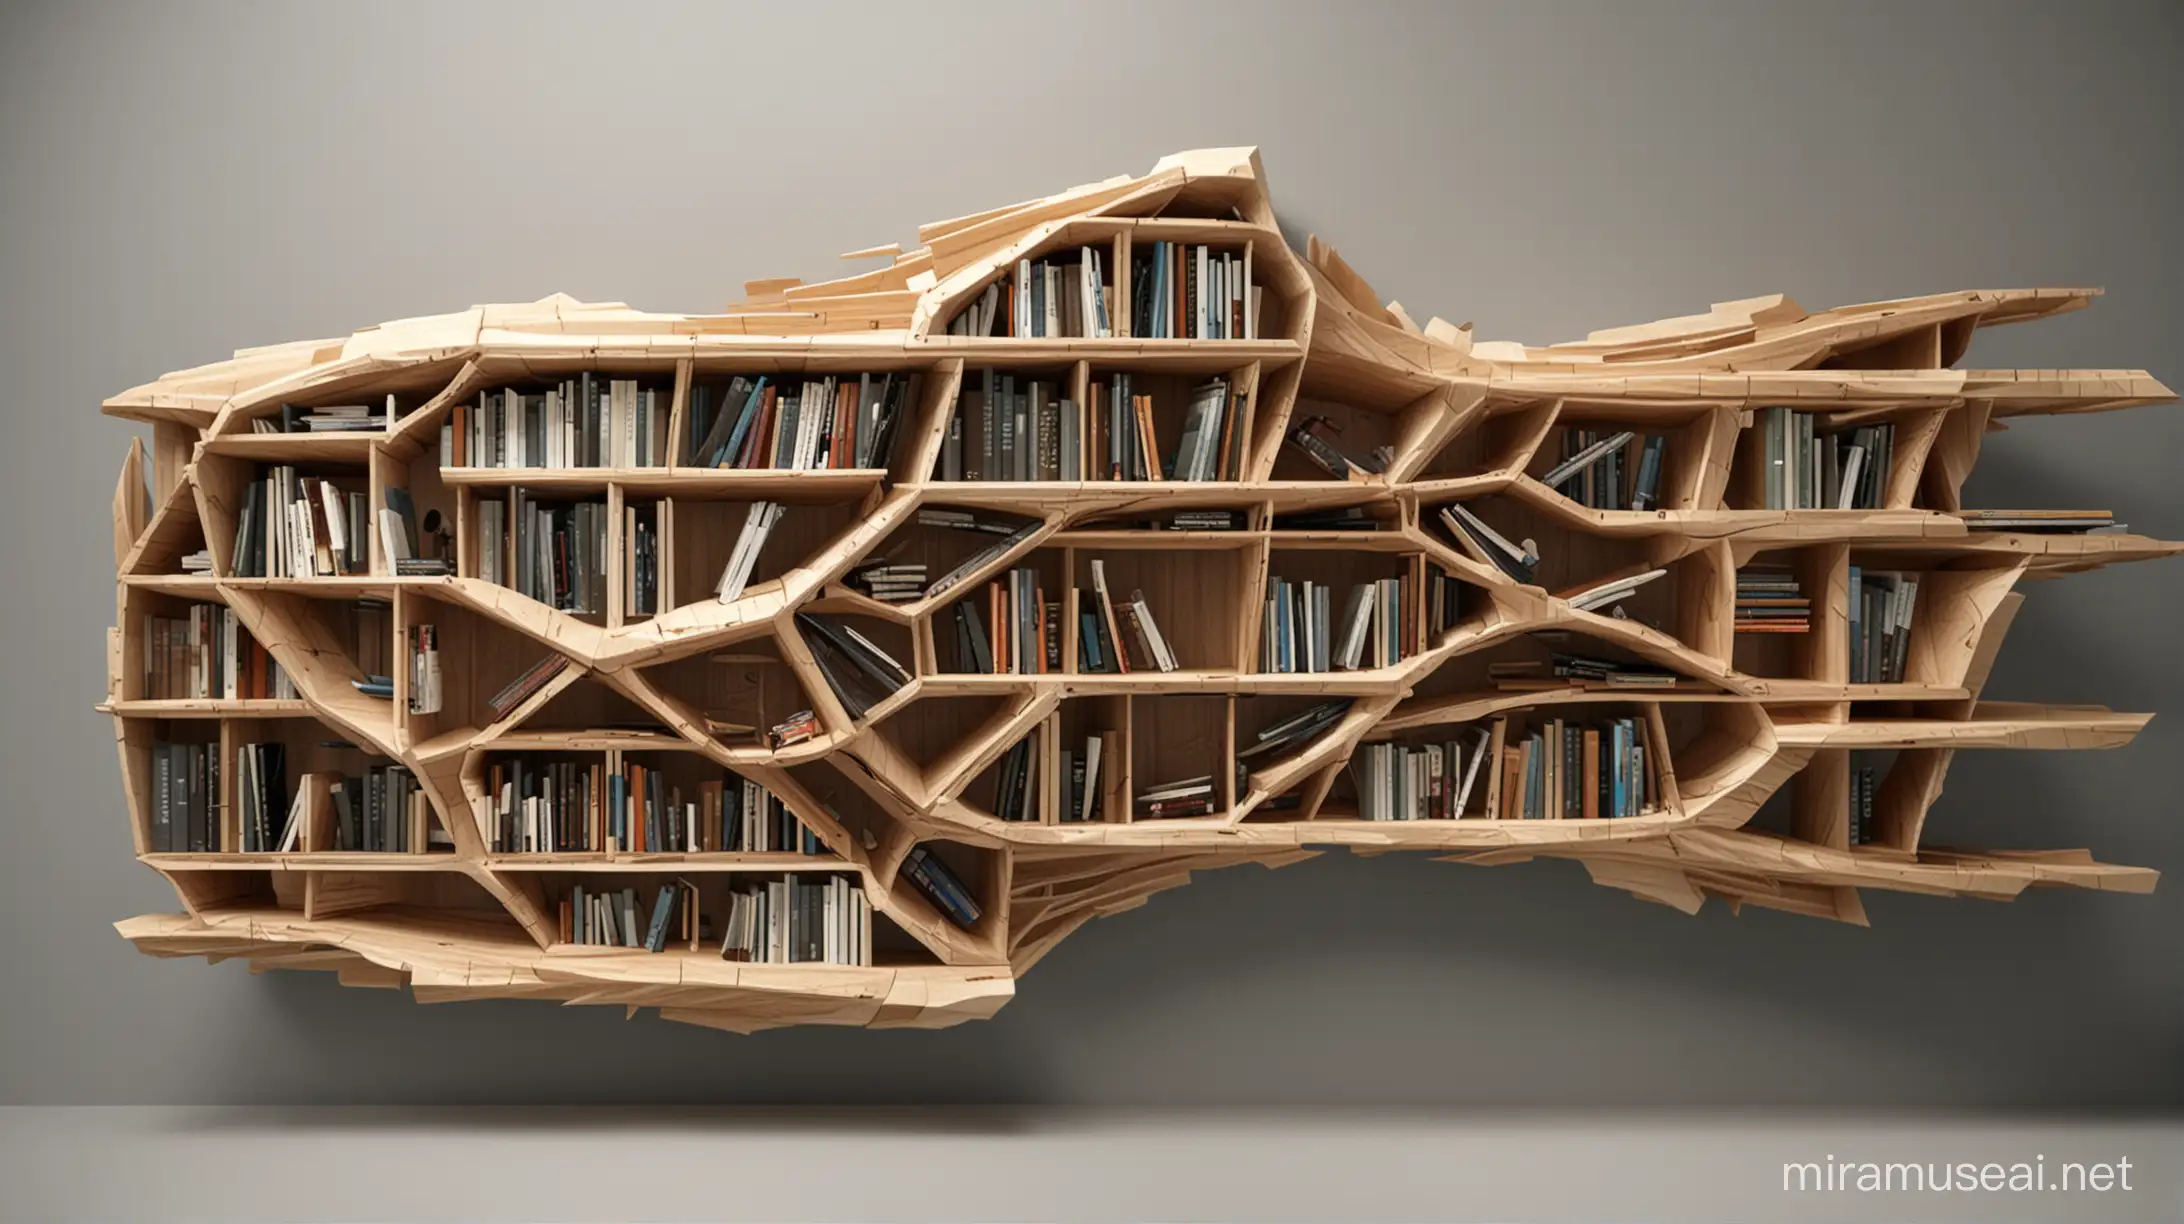 Futuristic Parametric Wood Bookshelf Design without Straight Lines or Right Corners